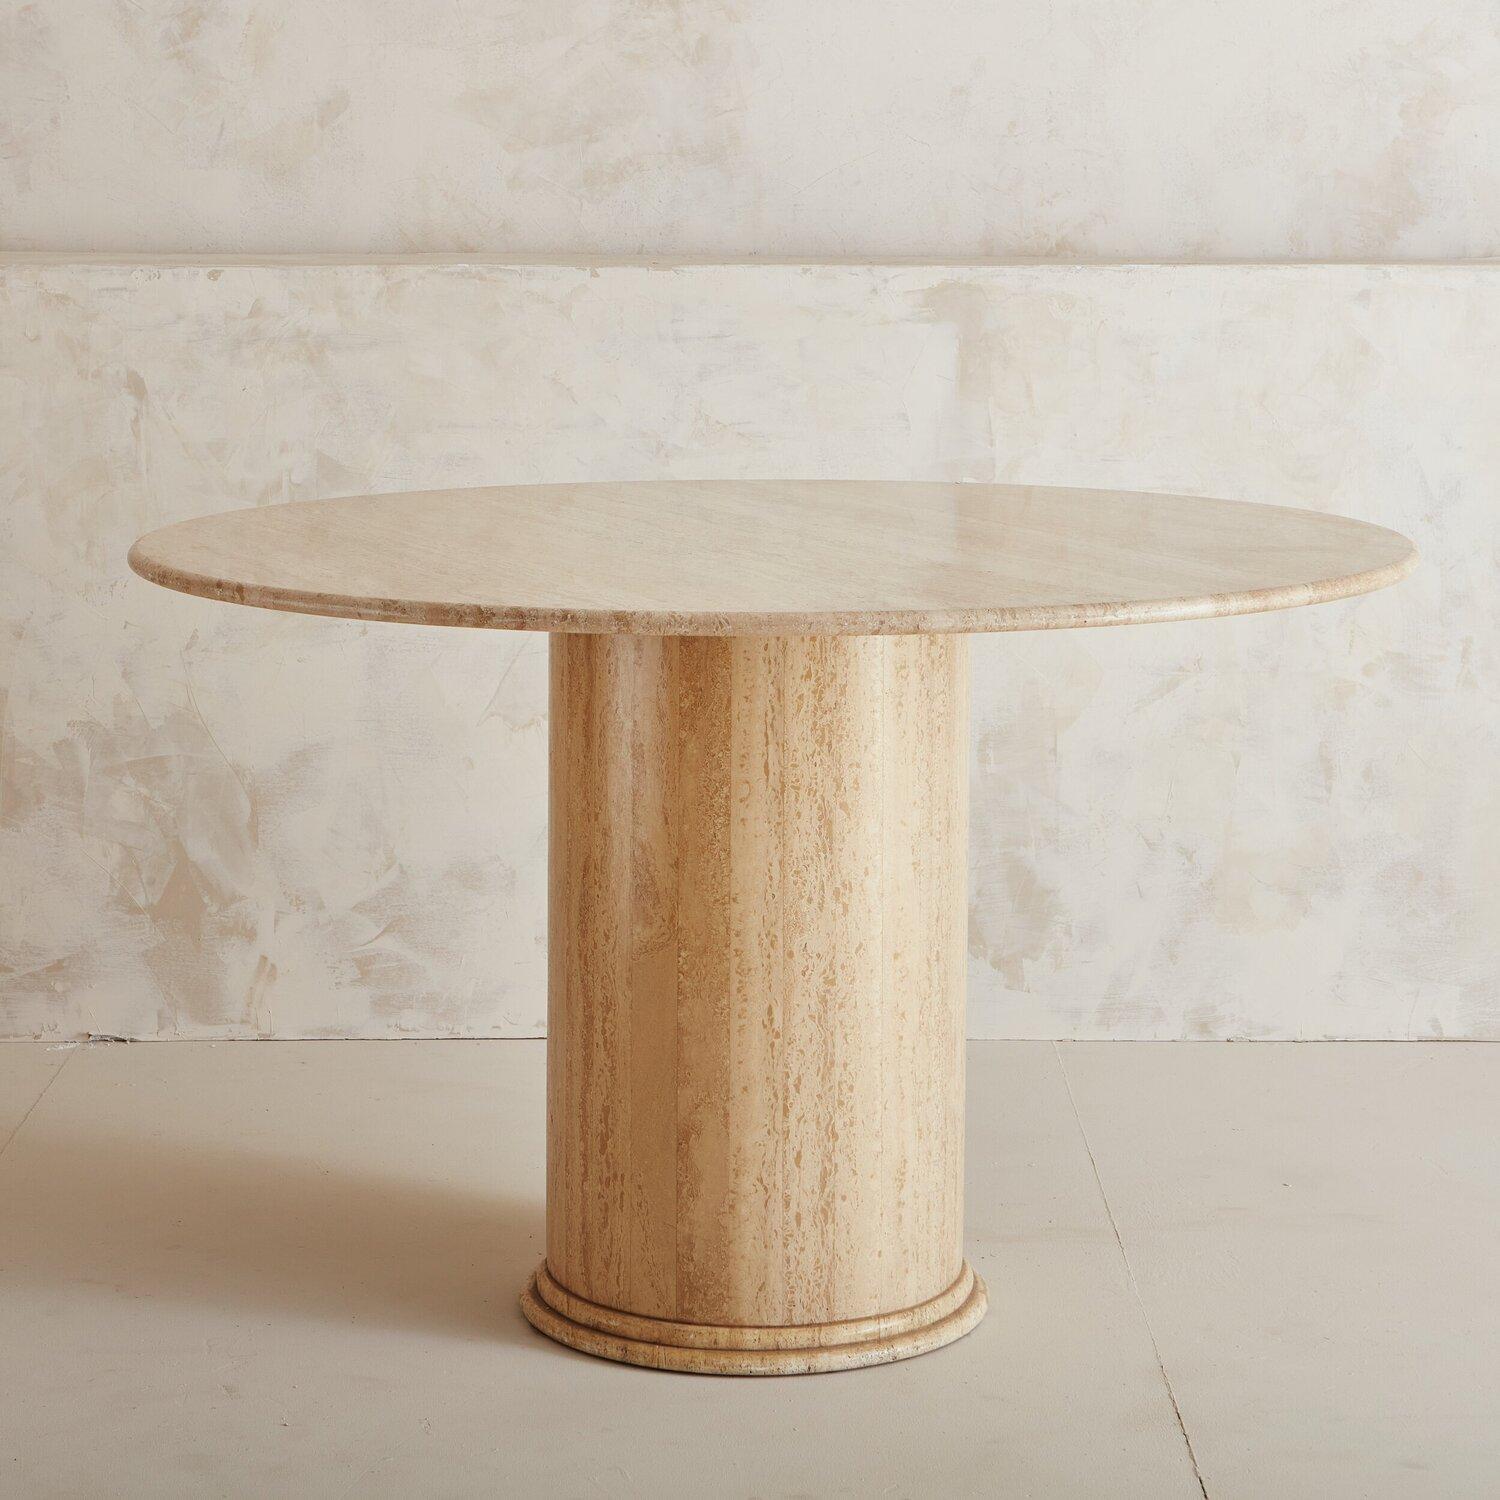 A beautiful honed Travertine dining table featuring a large circular mitered base with a banded-edge detail. Sourced in Northern Spain. 

Dimensions: 31” Height x 48.75” Diameter; Top: 1” Thick; Base: 16.75” Diameter.

 